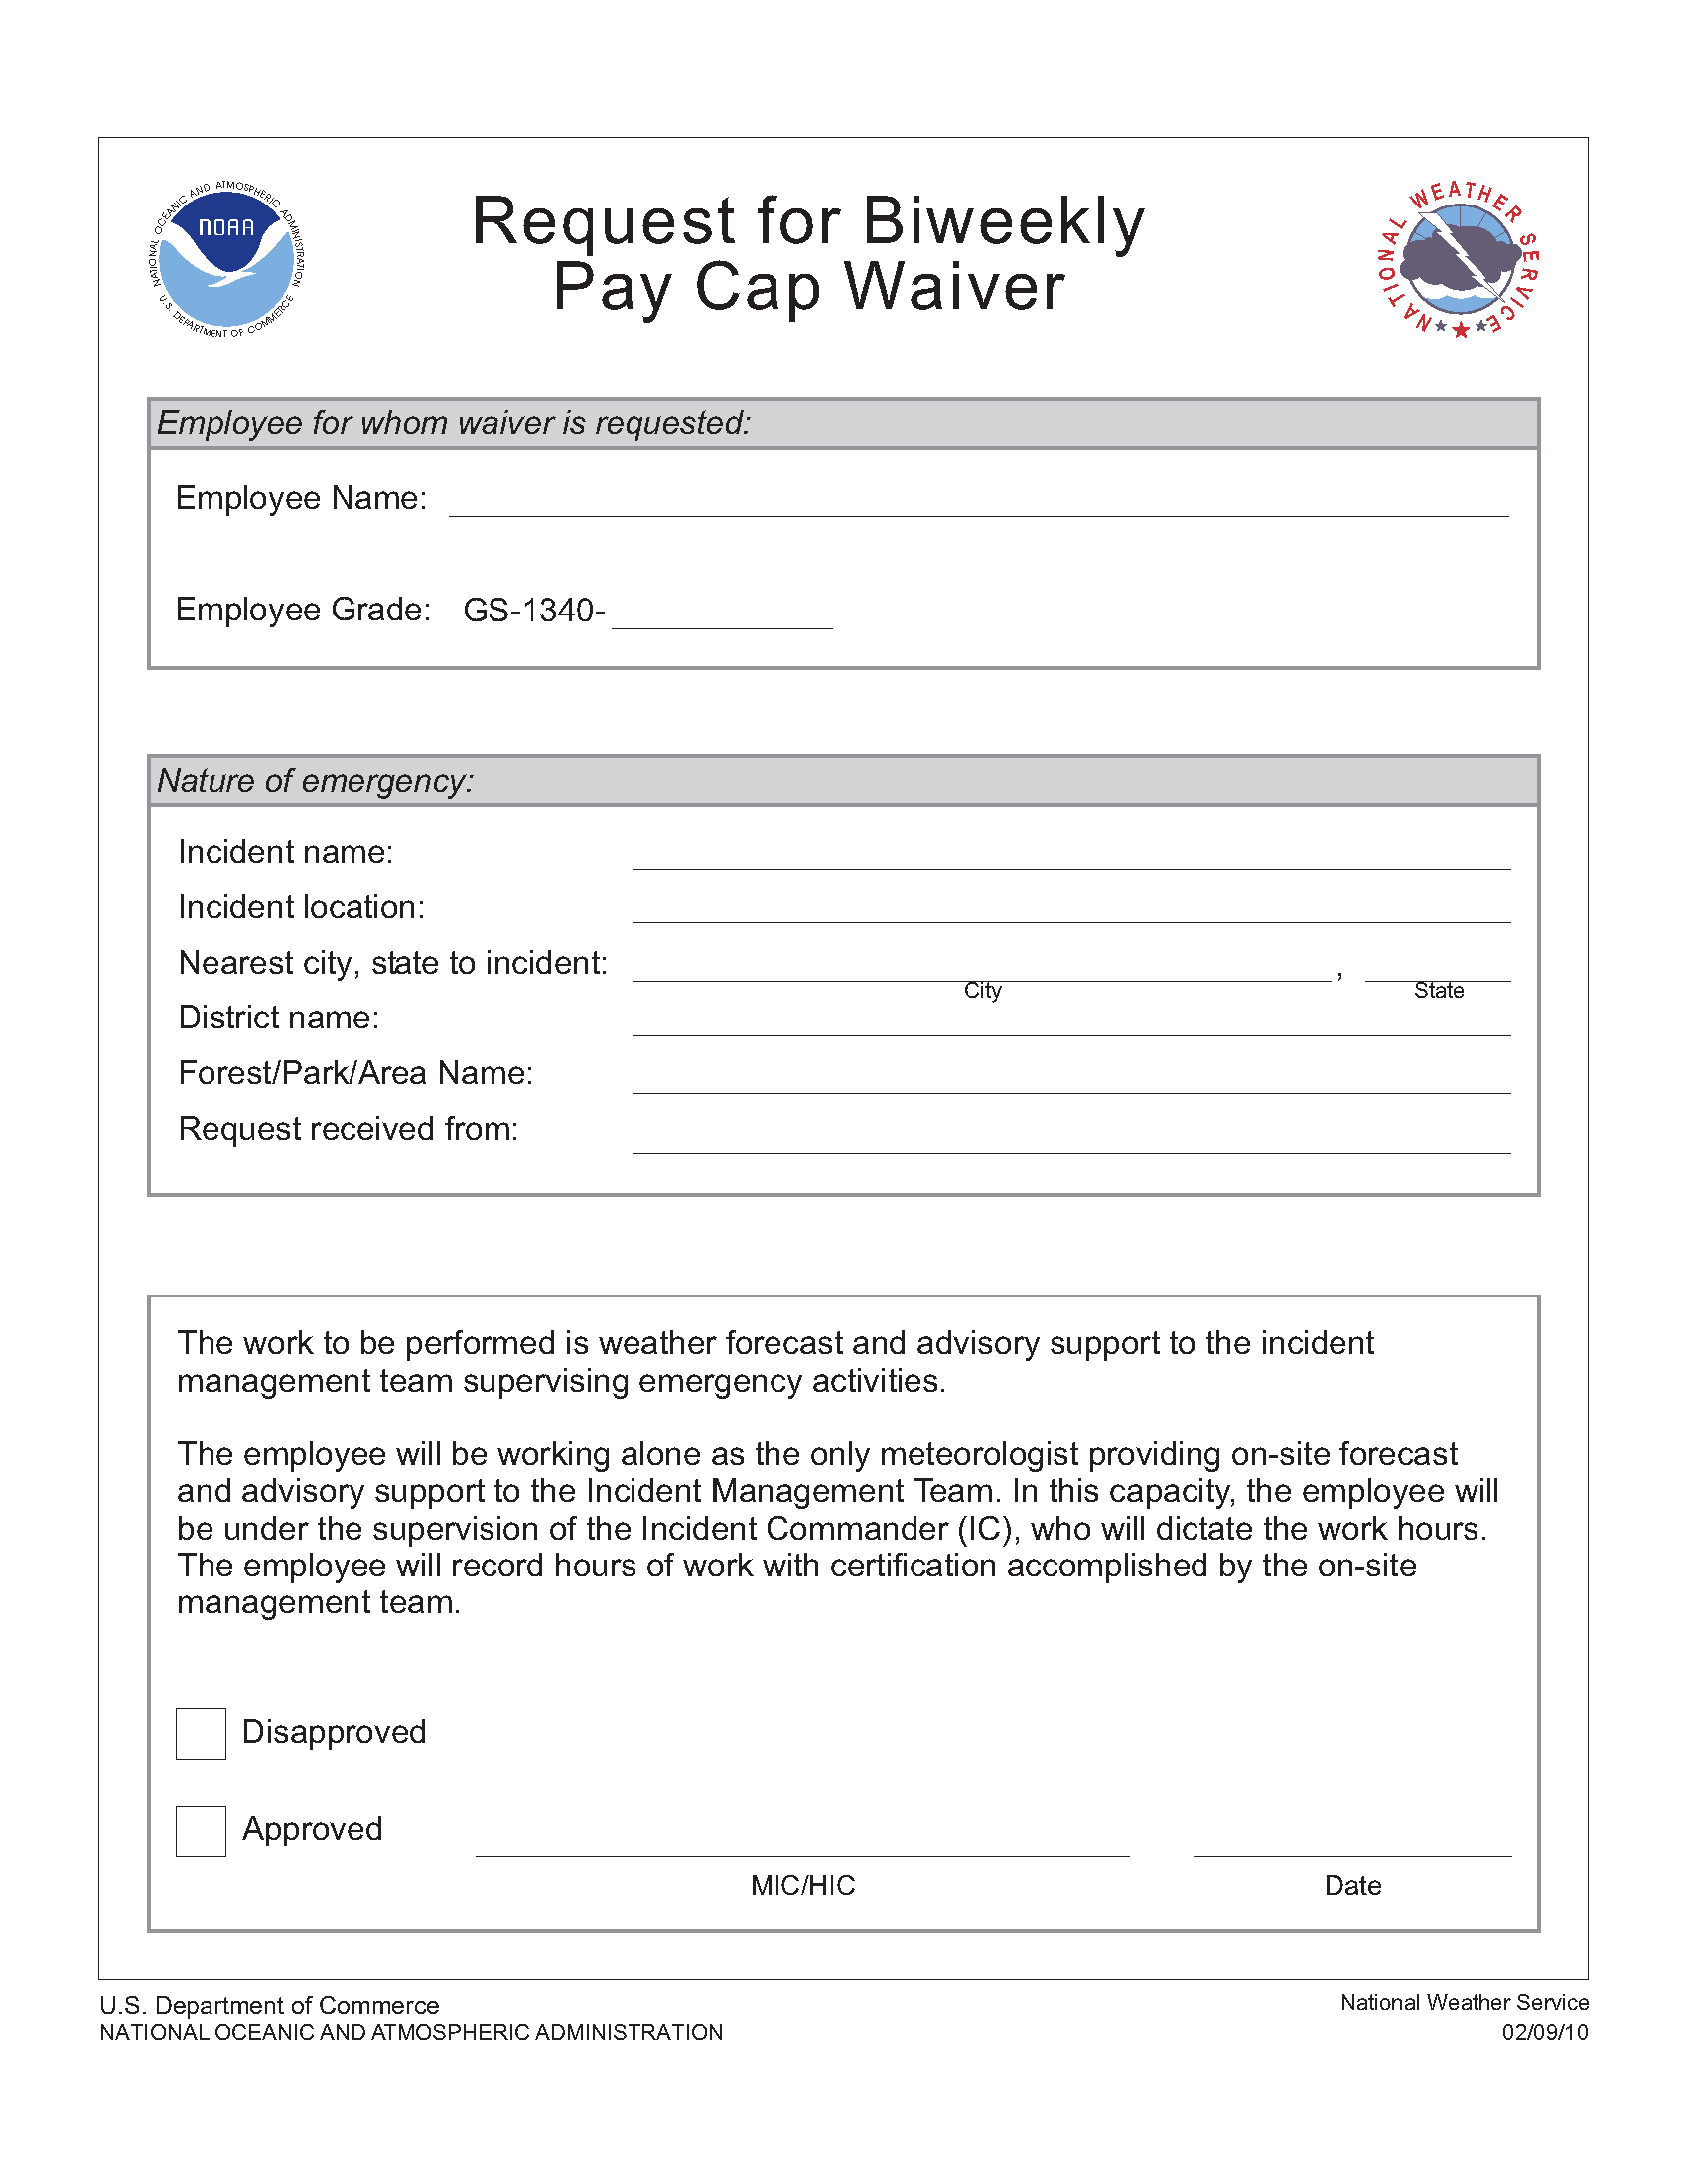 paycapwaiver.png